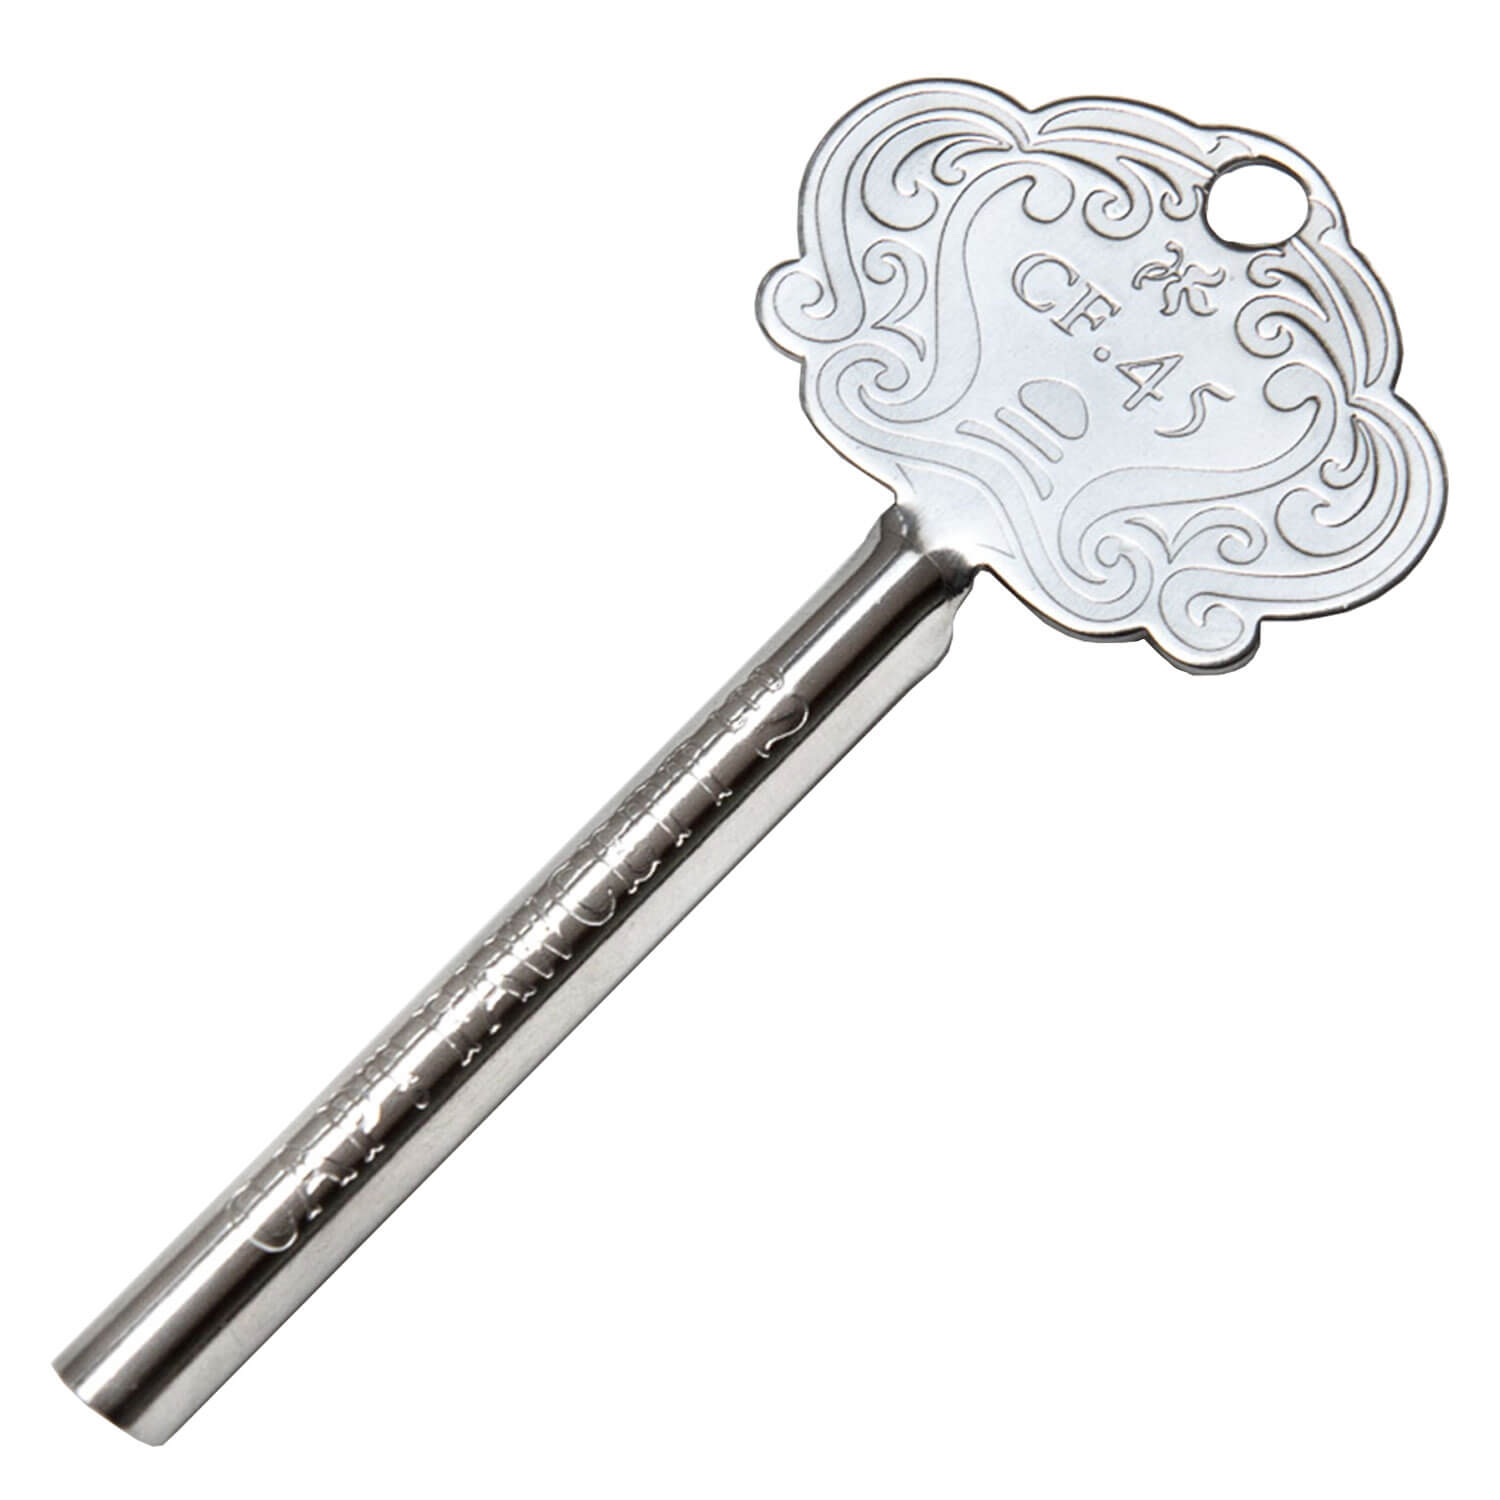 Product image from Capt. Fawcett Tools - Metal Tube Key